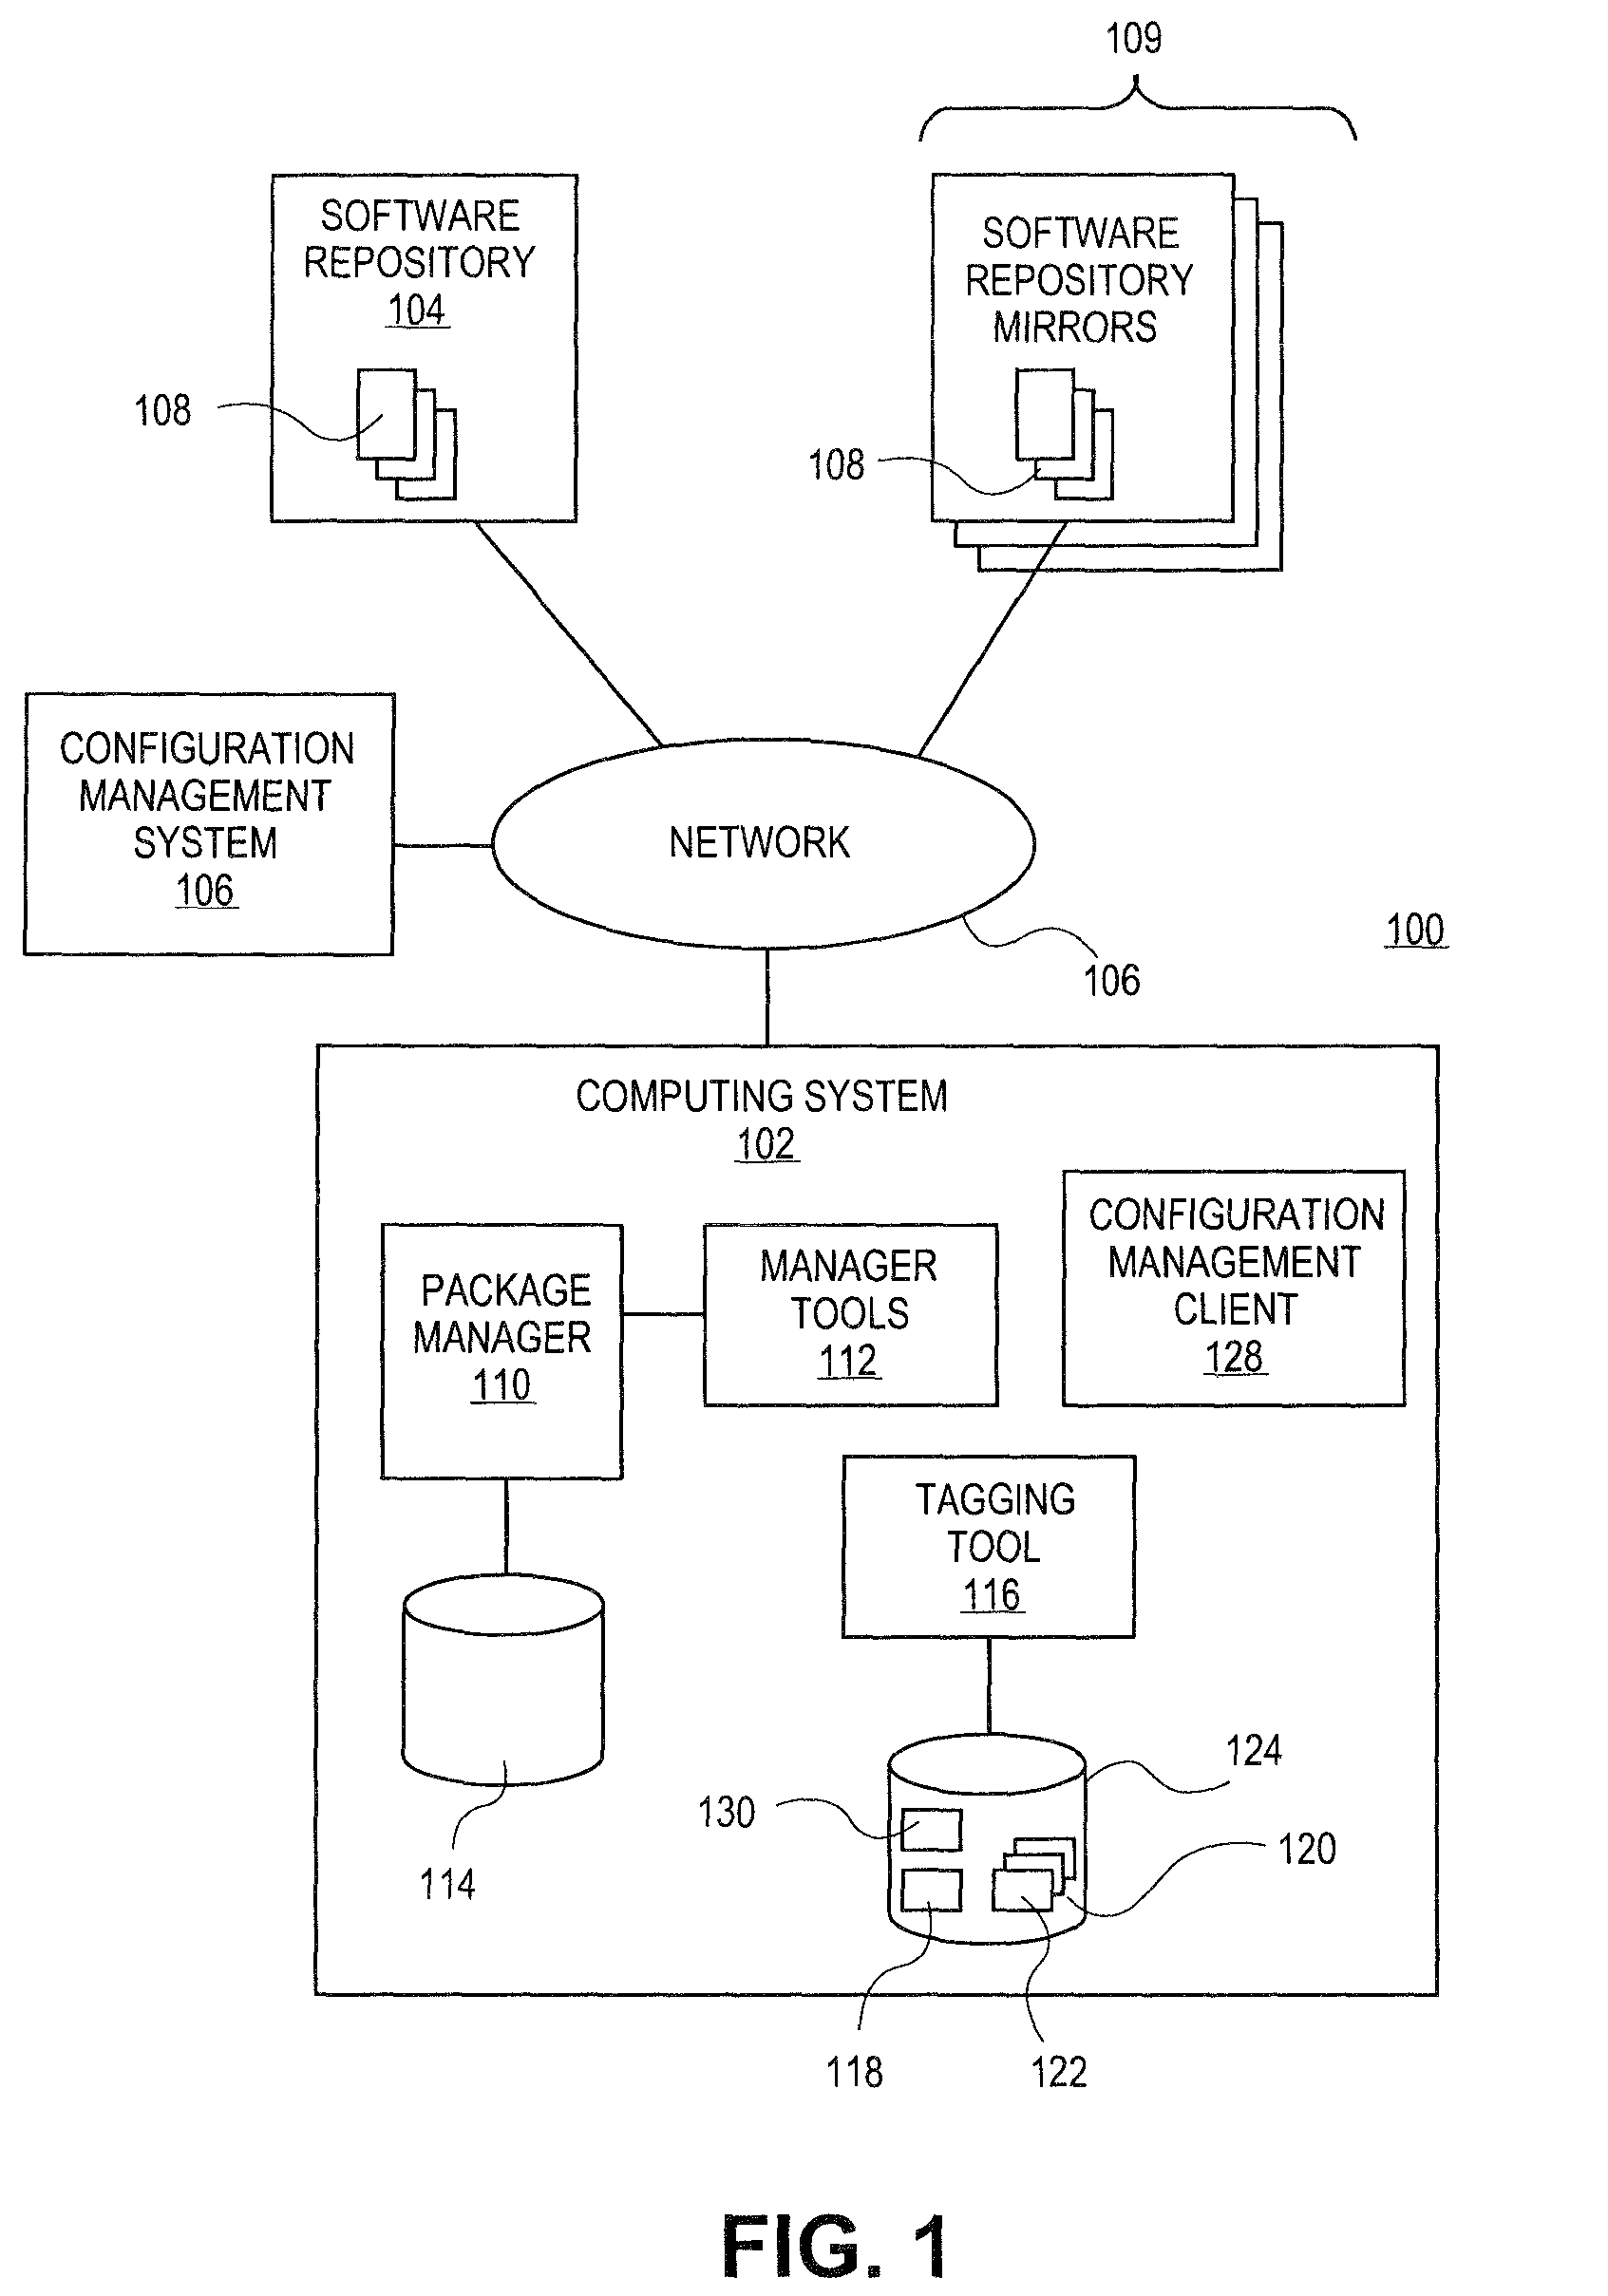 Systems and methods for tracking a history of changes associated with software packages and configuration management in a computing system